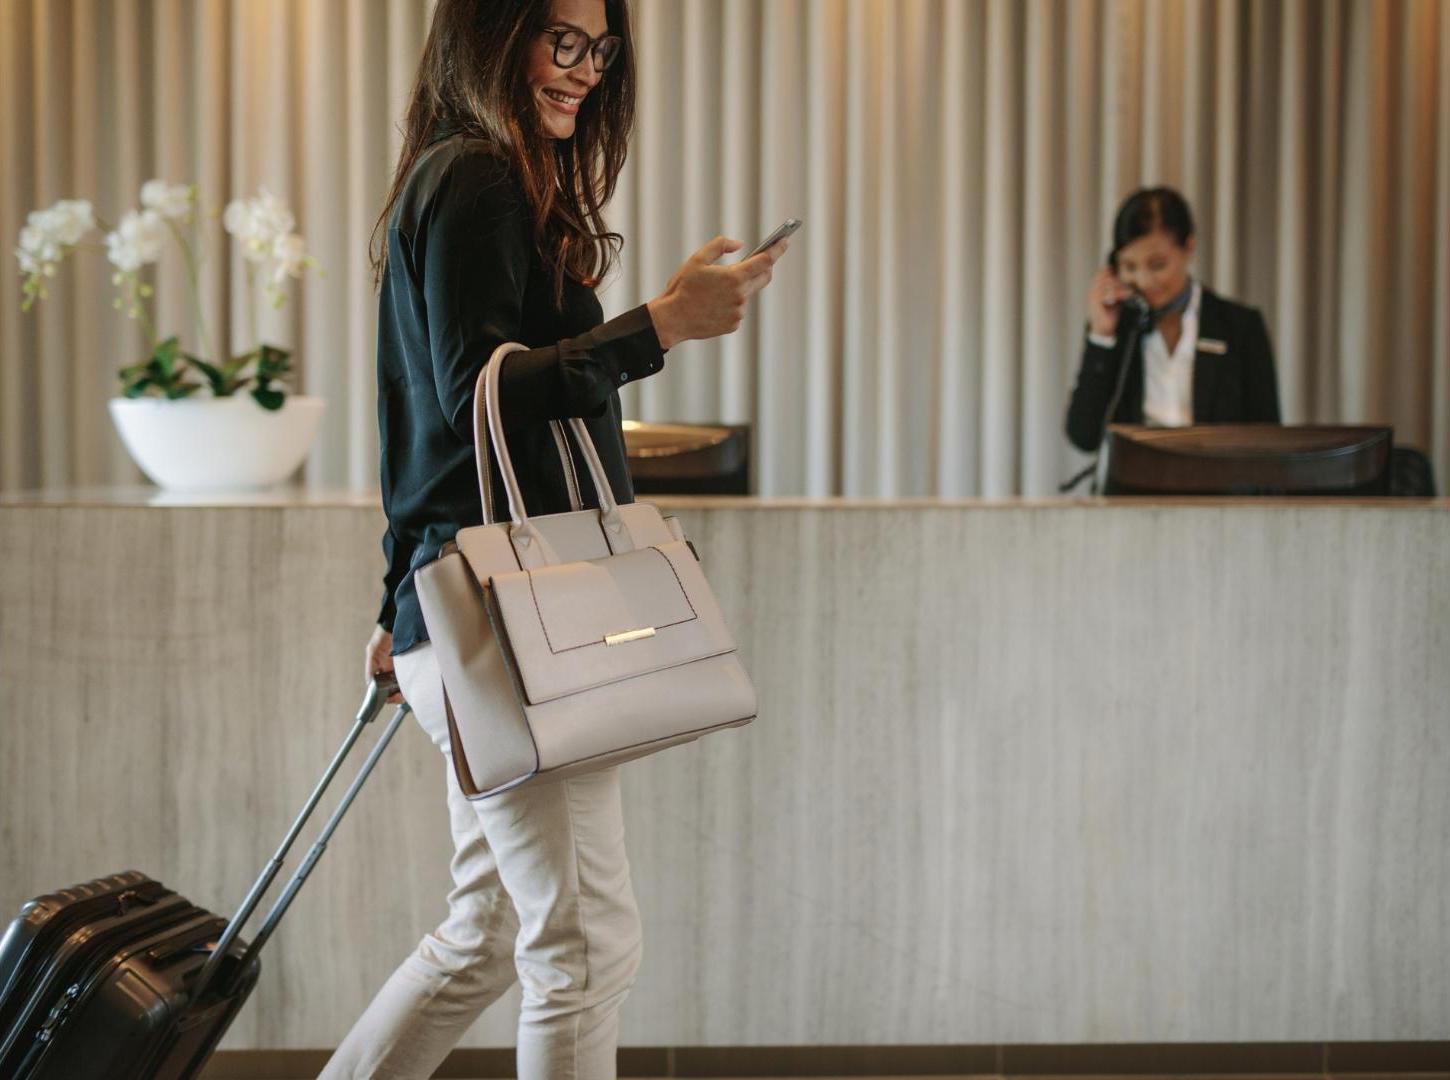 Business-woman-pull-her-luggage-and-smile-to-her-phone-in-front-of-hotel-front-desk-and-receptionist-behind-her-call-the-other-guest